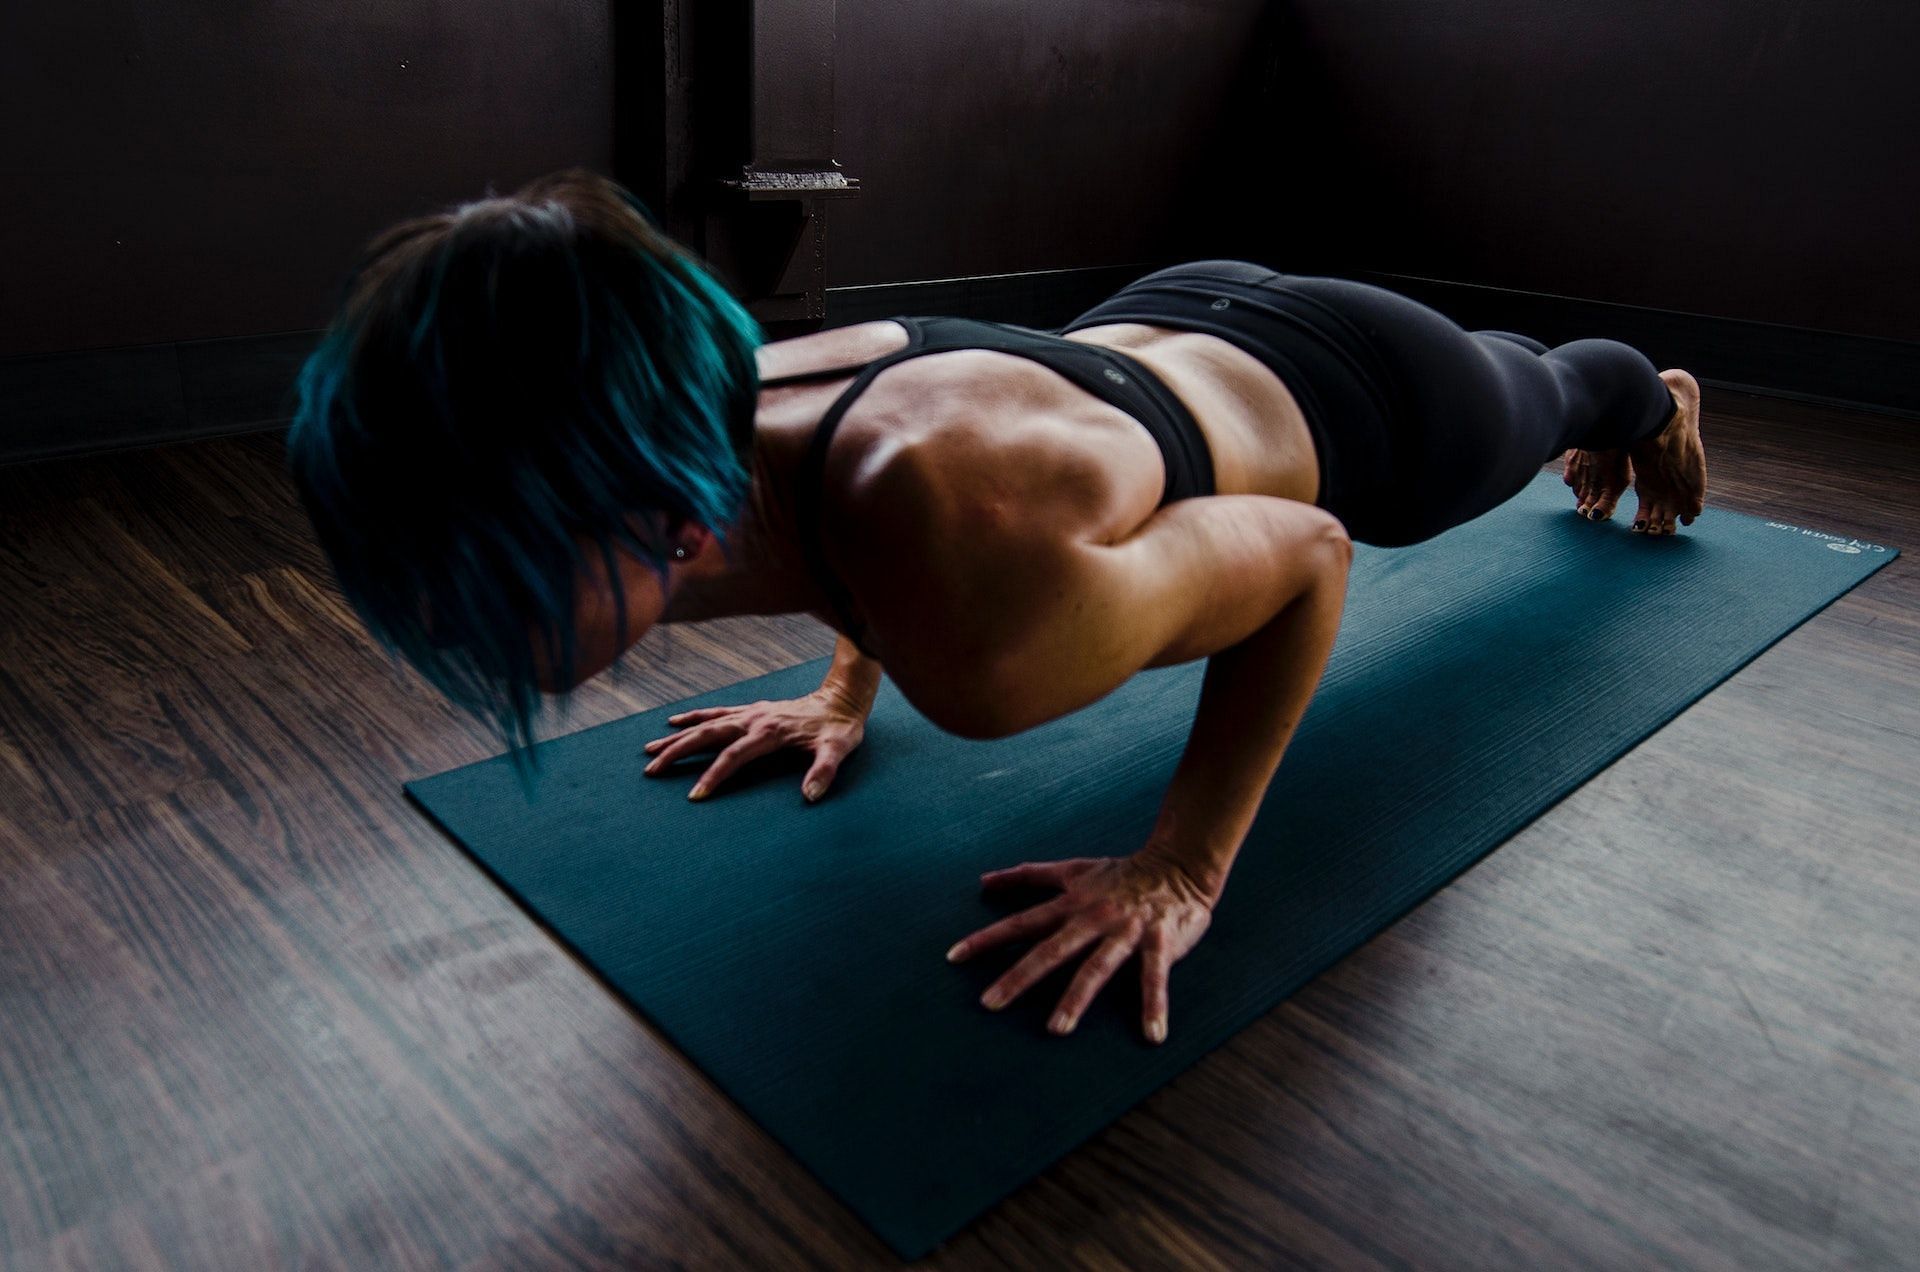 Mountain climbers target the shoulders, chest, back, core, and arms. (Photo via Pexels/Karl Solano)